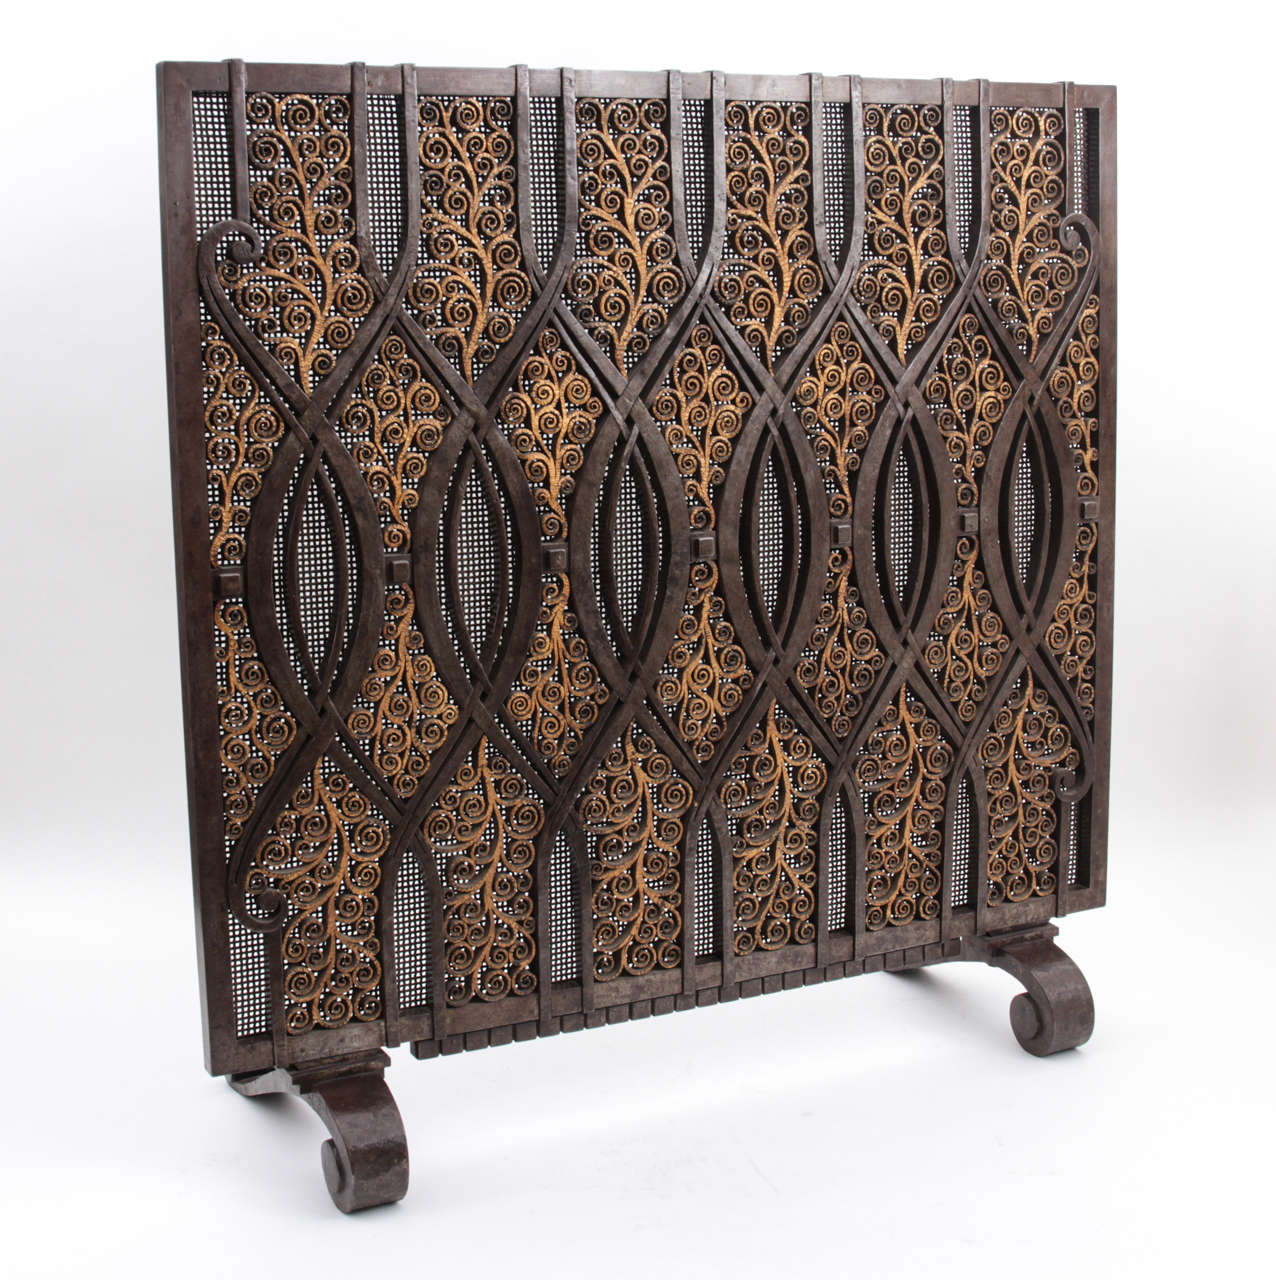 EDGAR BRANDT  (1880-1960)  France

Fire screen c. 1925

Patinated wrought-iron with a bronze tone and a delicately wrought gilt iron scrolling vine motif with intersecting elliptical center medallions, all backed with a finely woven iron screen,